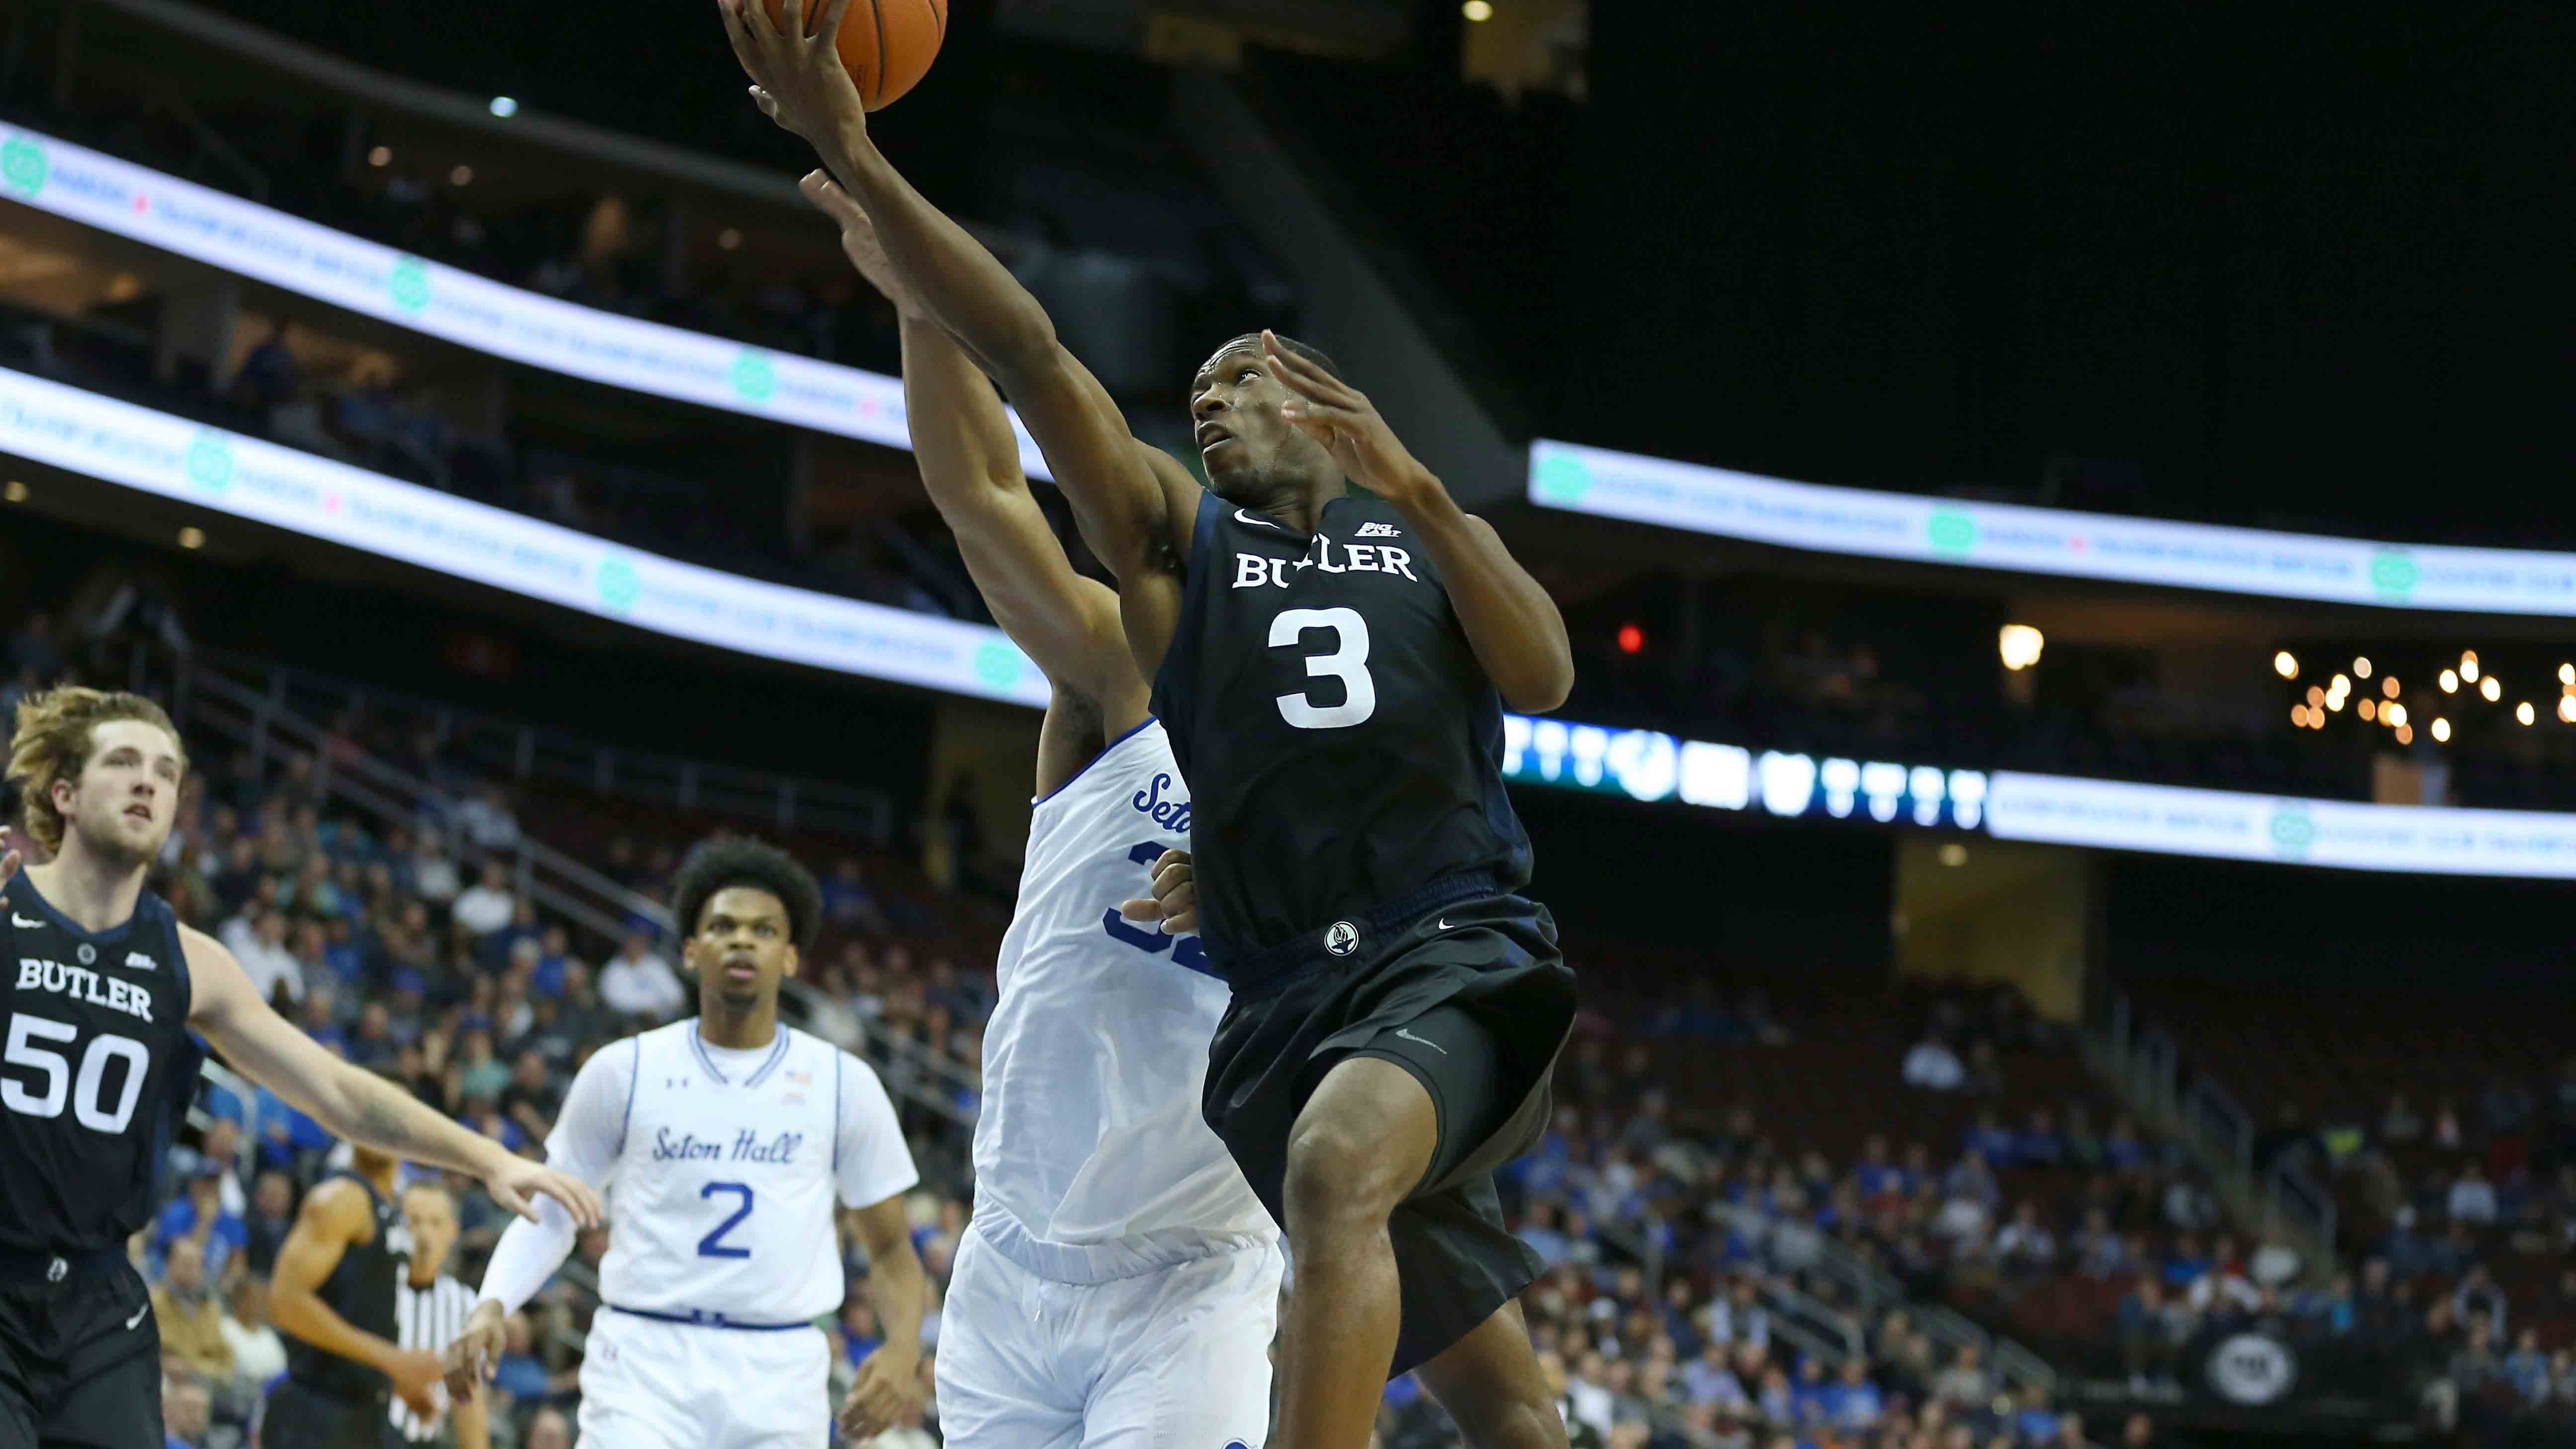 Butler rallies late but comes up short in 76-75 loss to Seton Hall